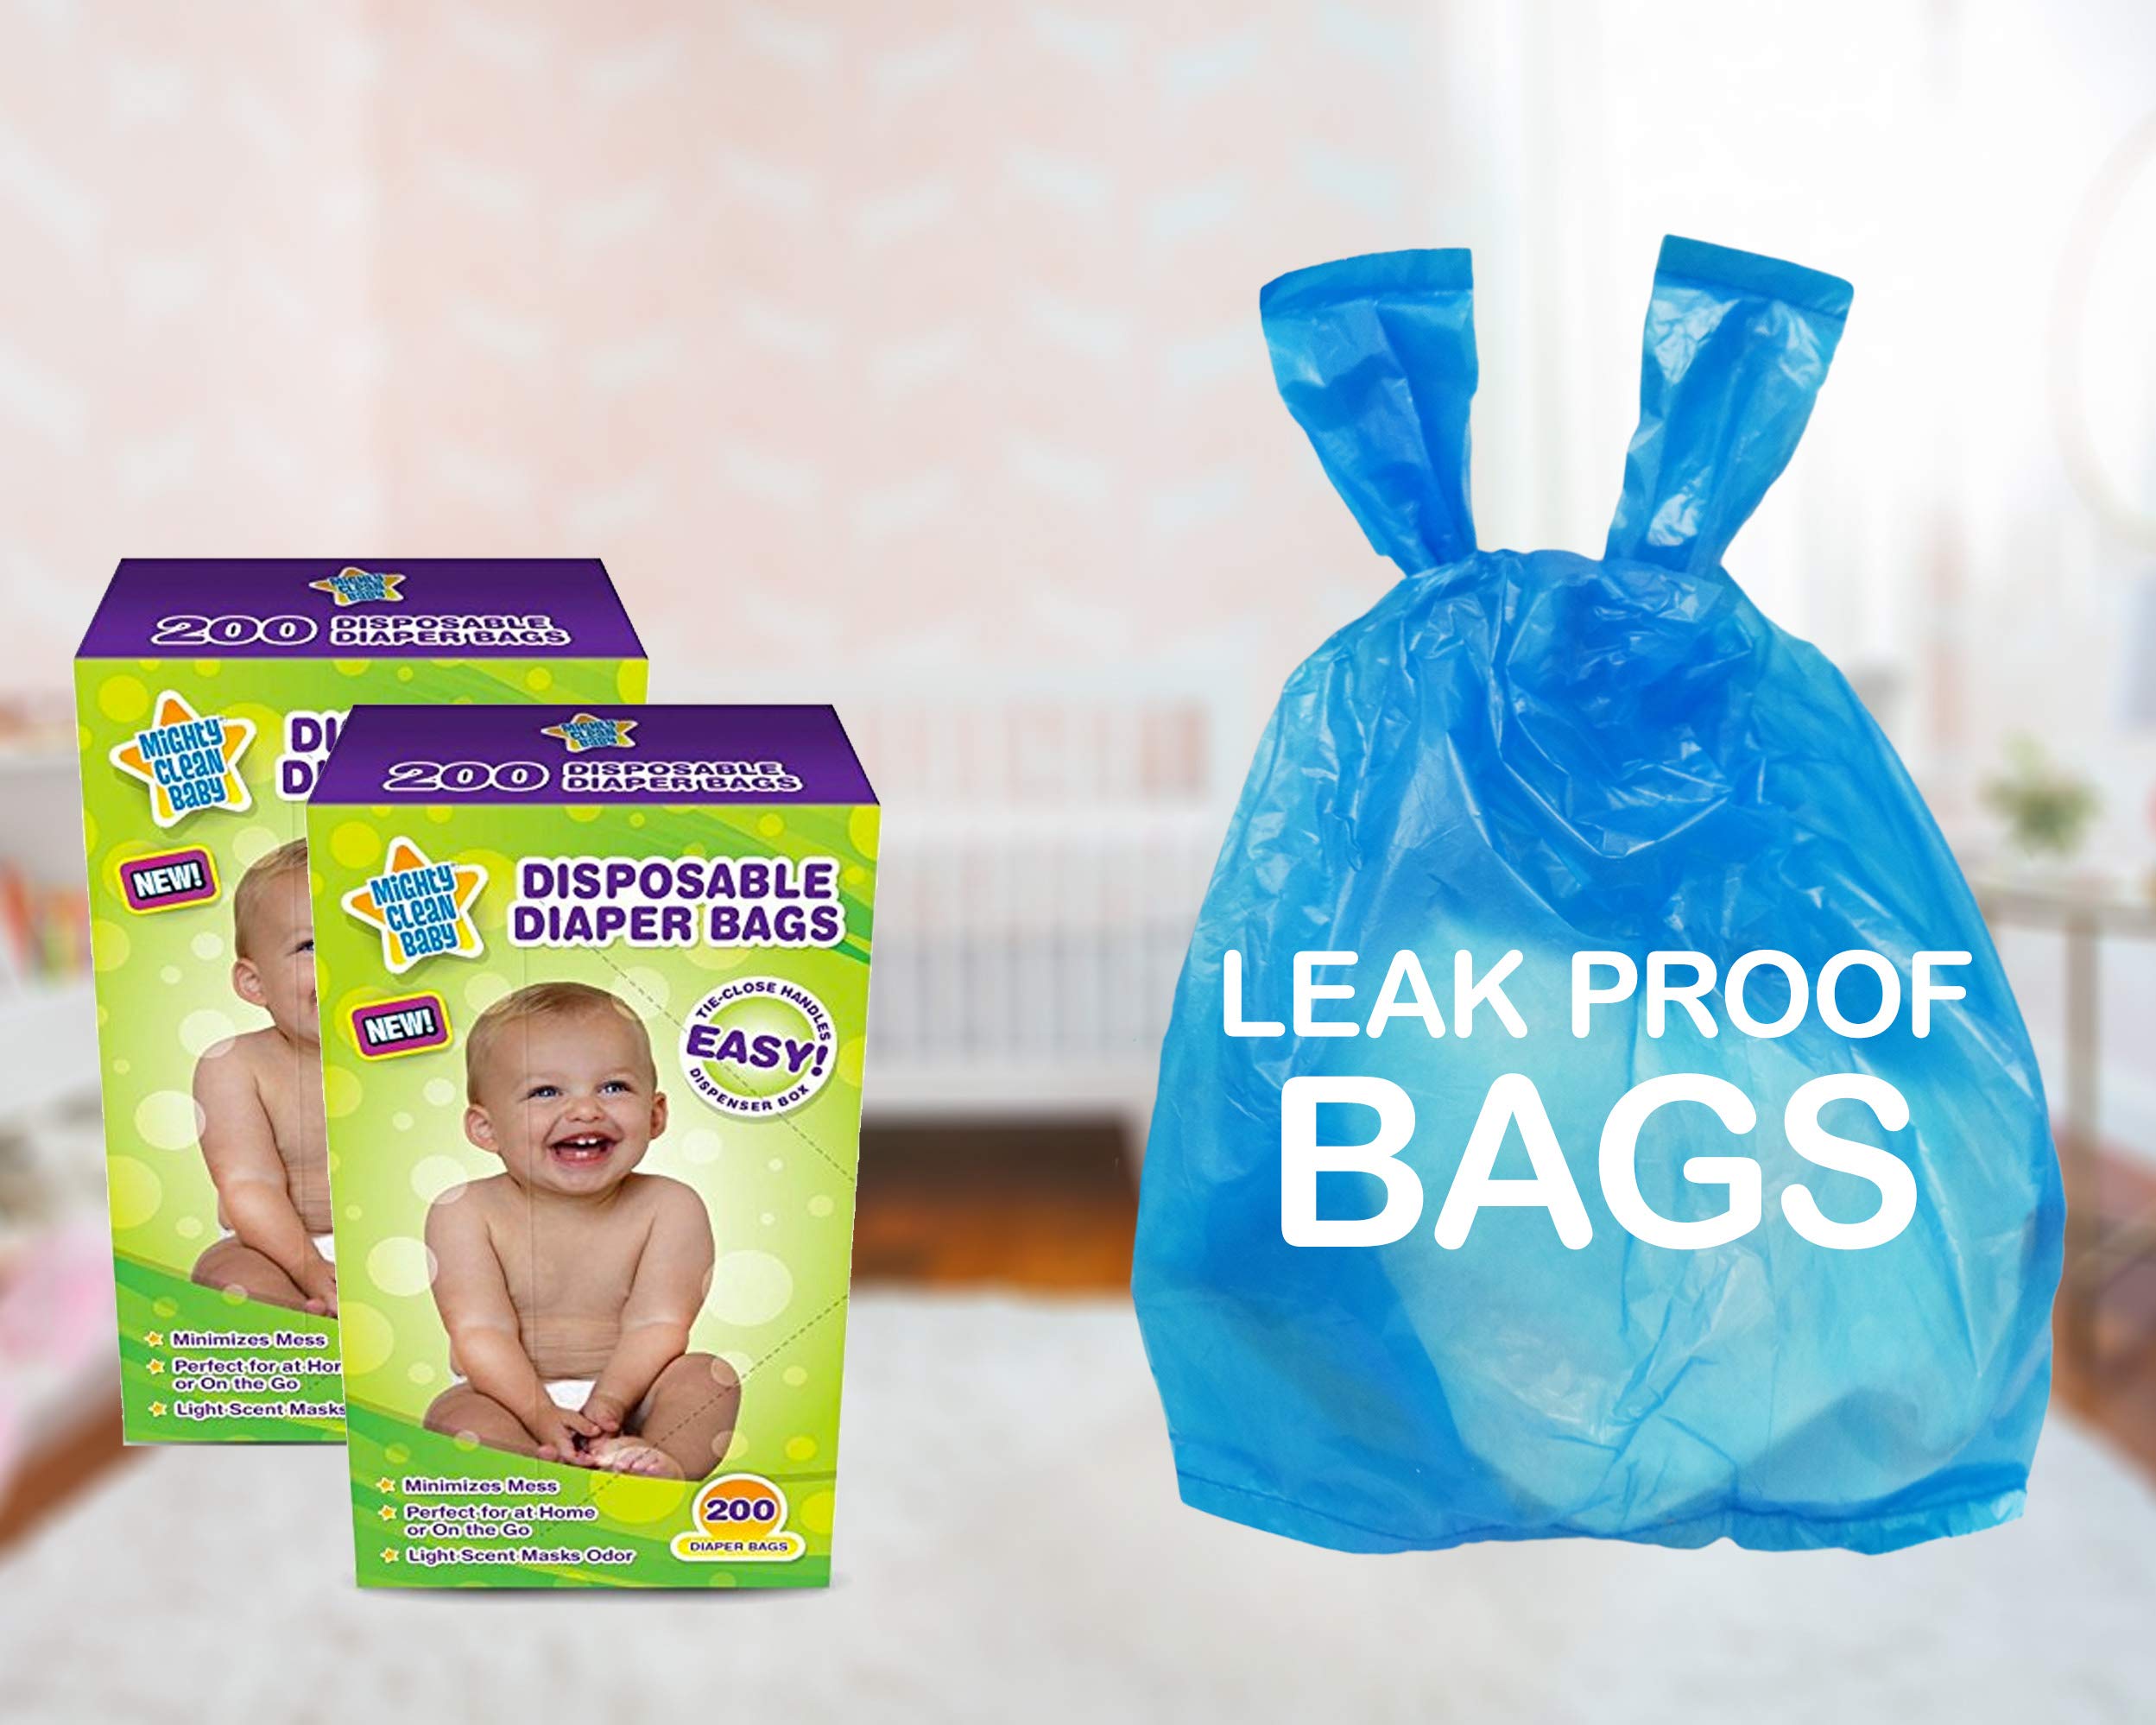 Mighty Clean Baby Disposable Diaper Bags with Light Powder Scent, 200 count